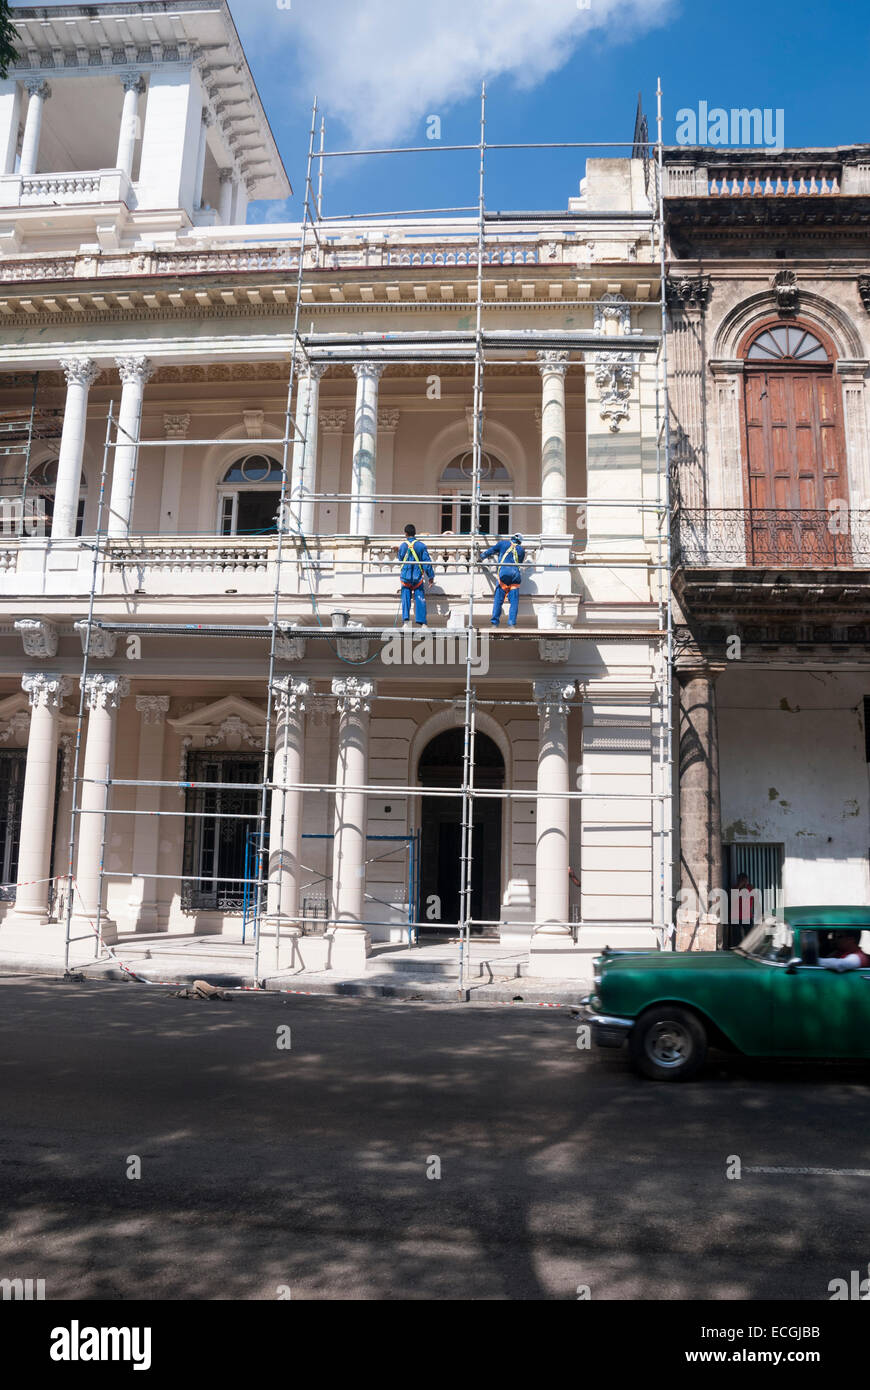 Workmen in the midst of restoring one of the many historic Spanish Colonial buildings that are in need of repair in Havana Cuba Stock Photo